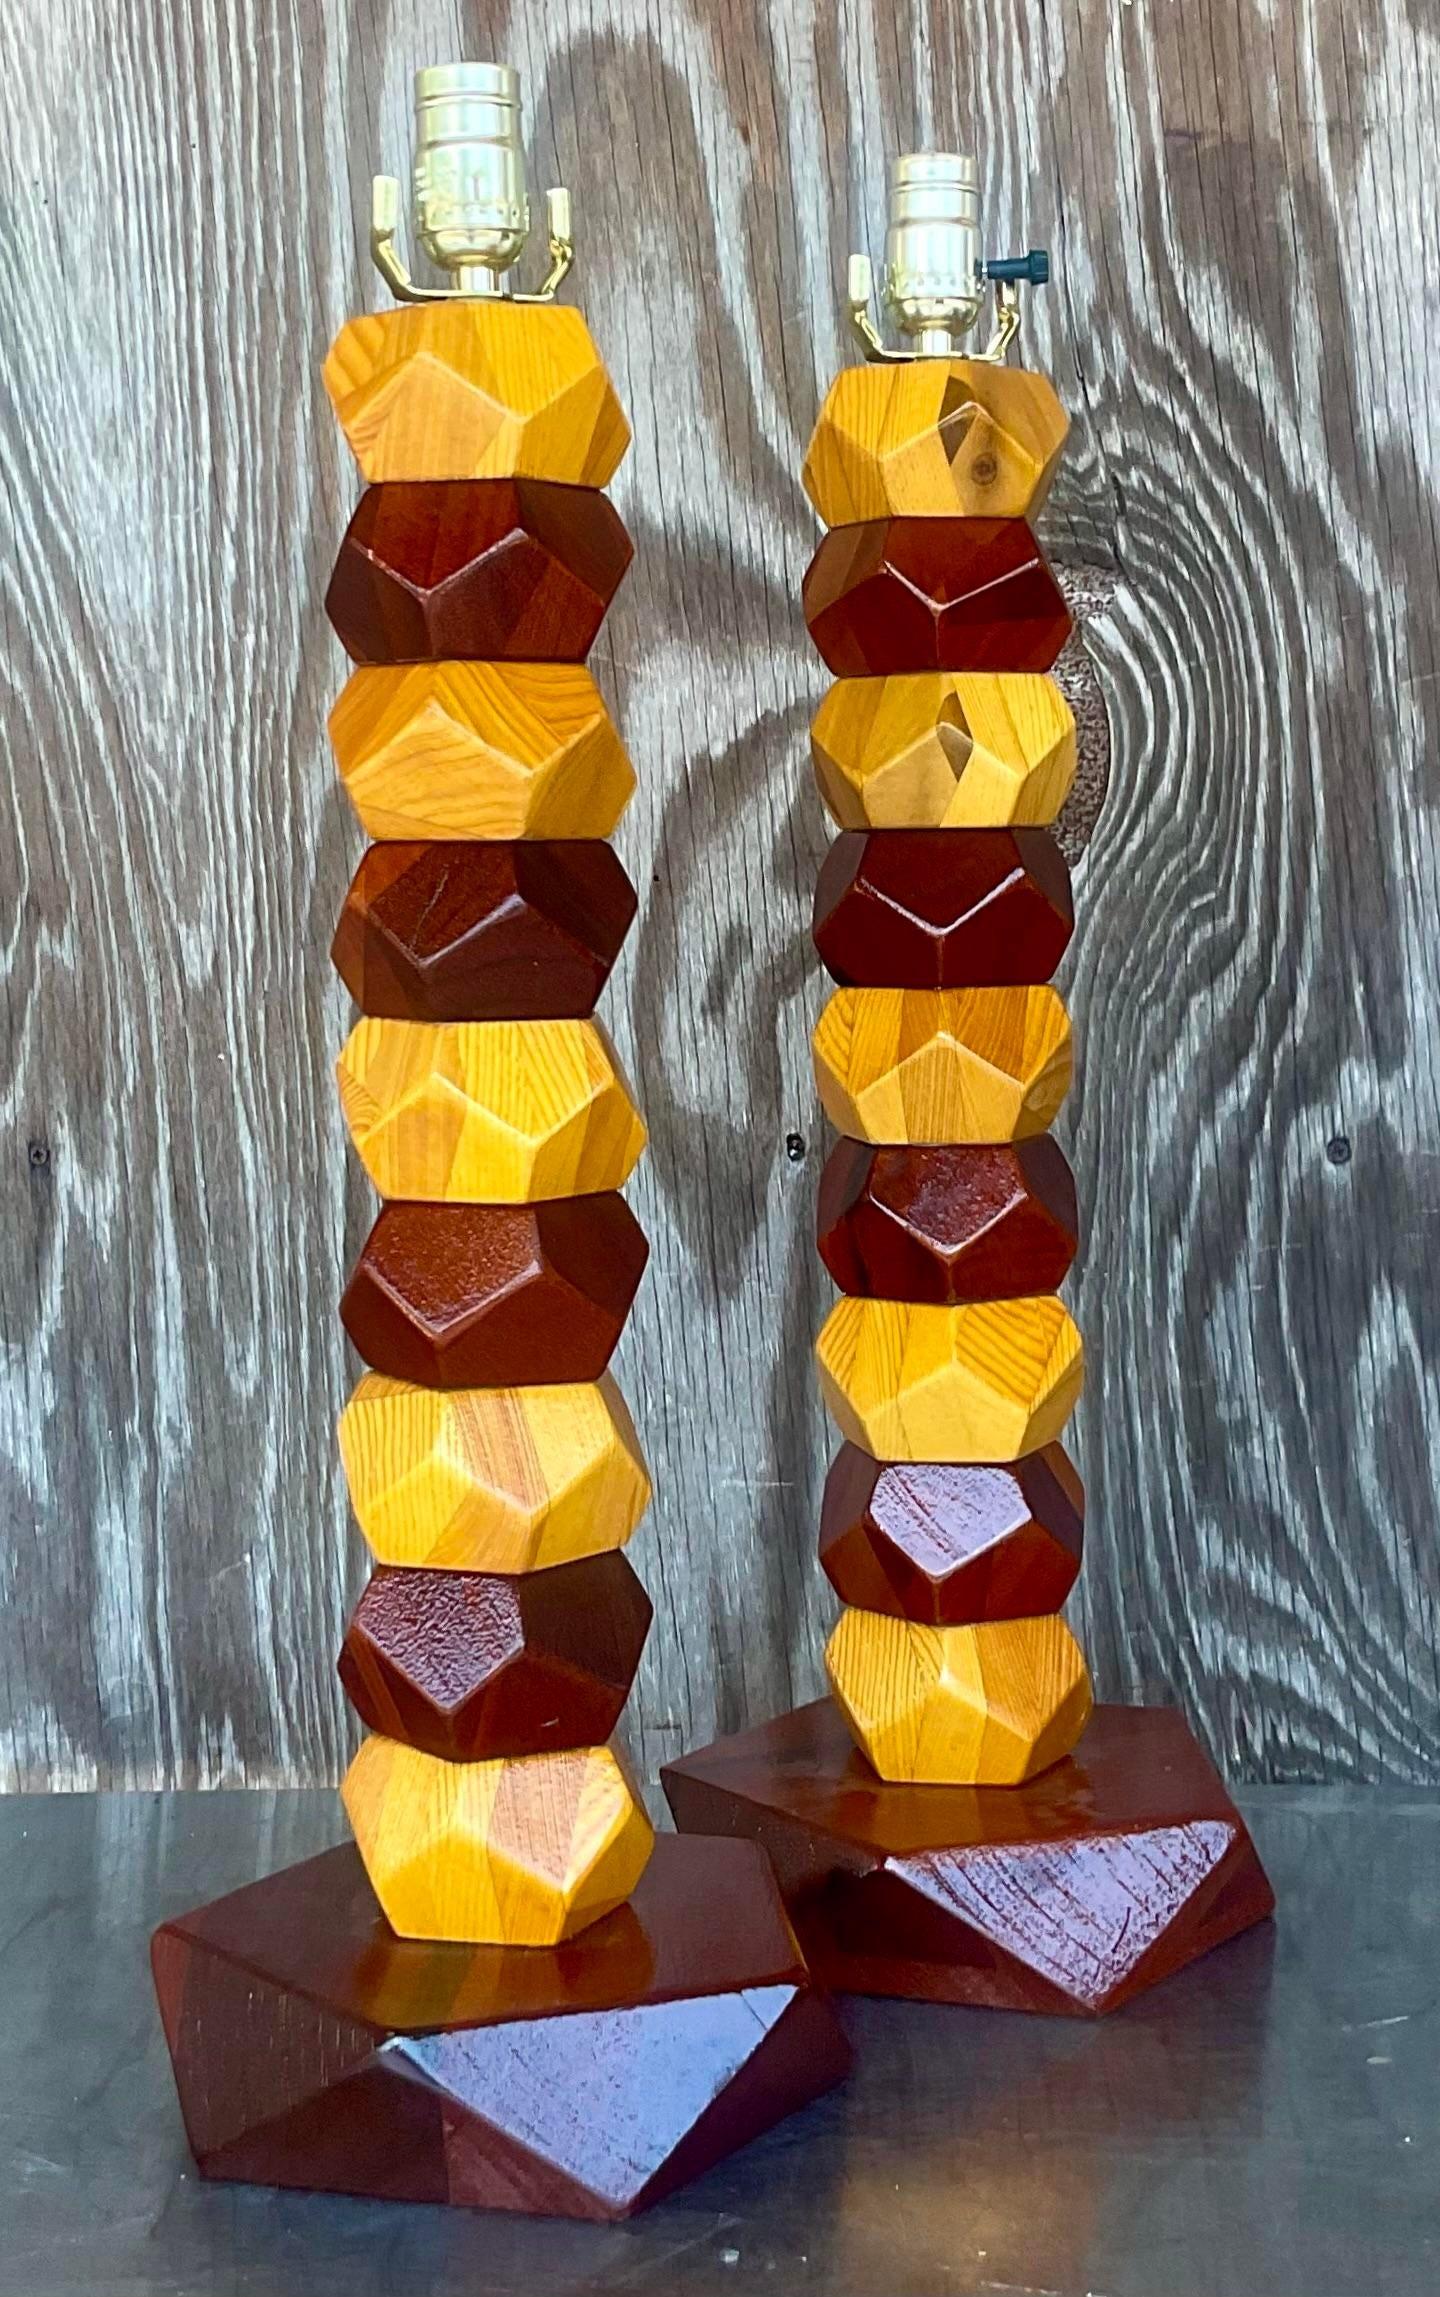 American Vintage Boho Stacked Faceted Wood Block Lamps - a Pair For Sale